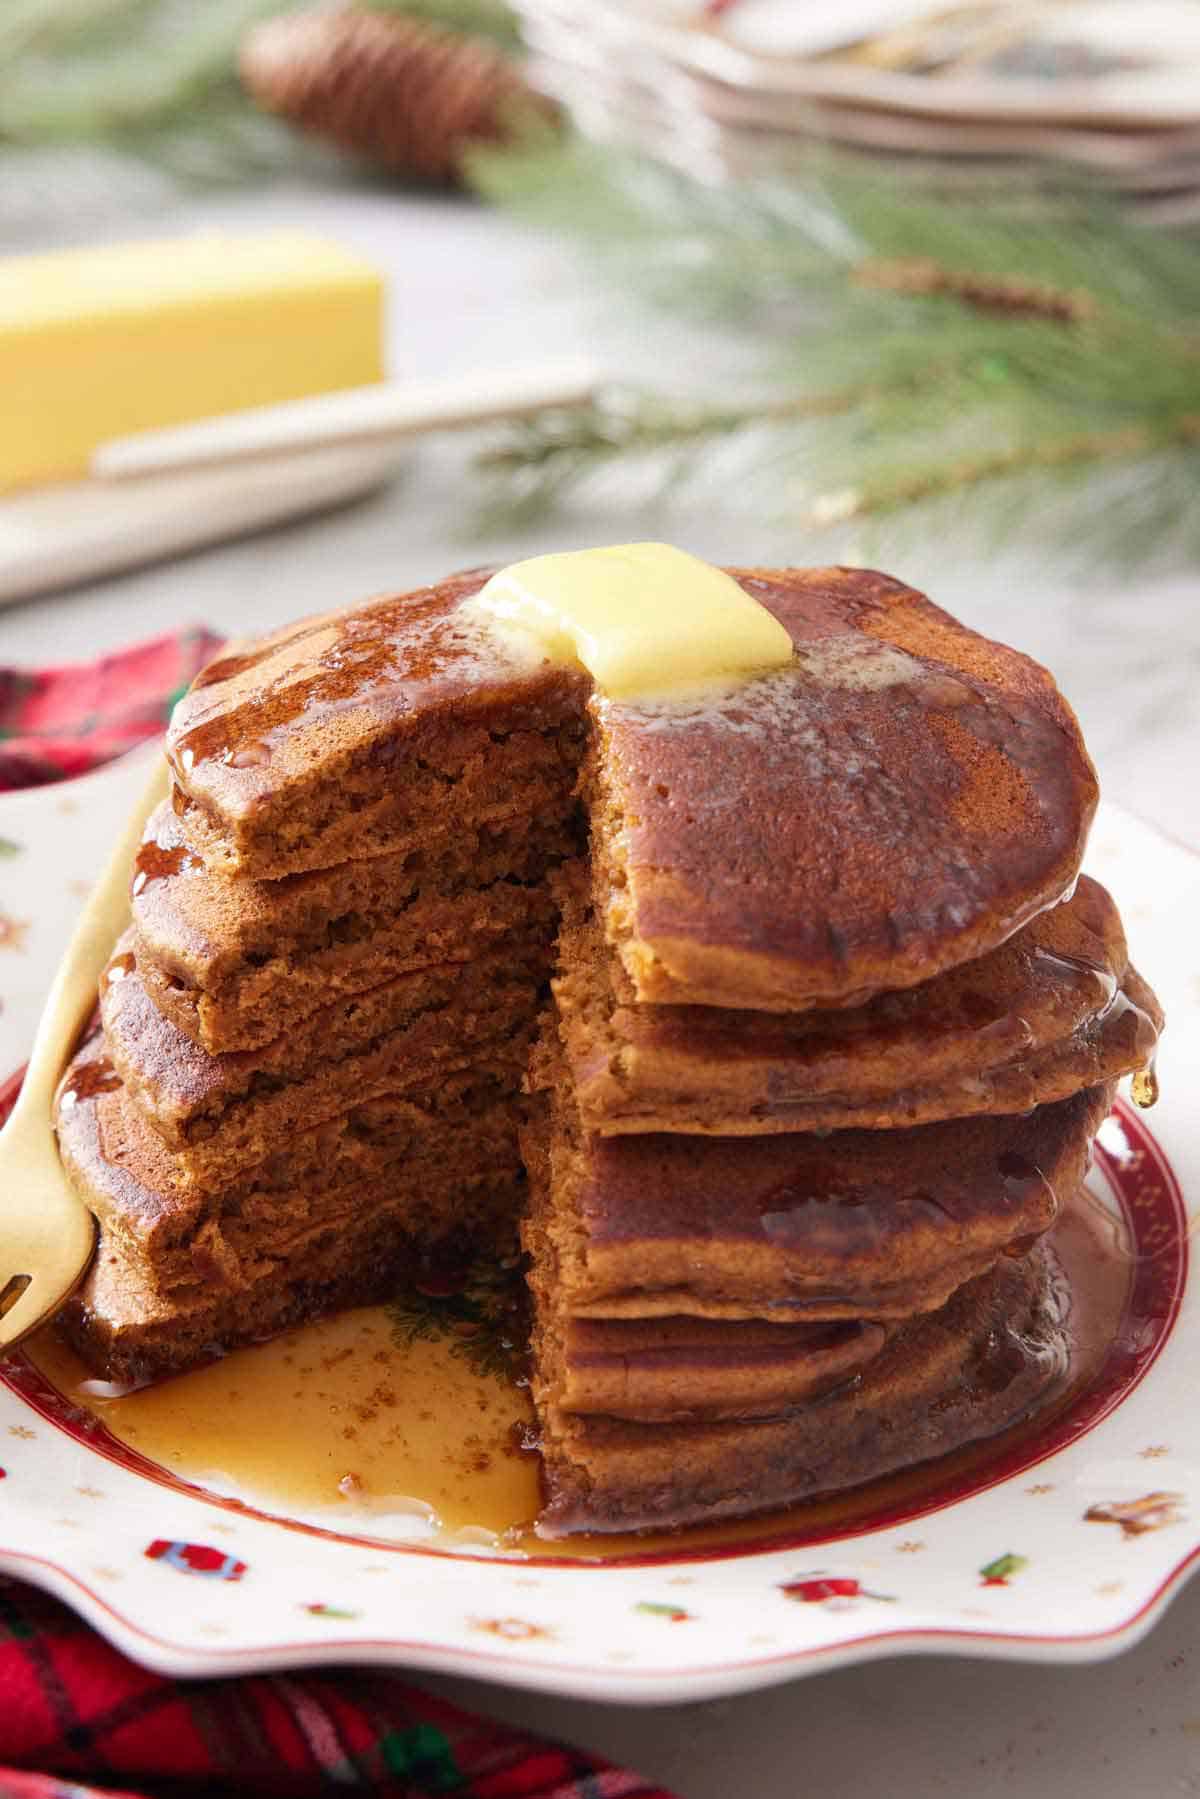 A stack of gingerbread pancakes with a portion cut out. Butter and syrup on top.